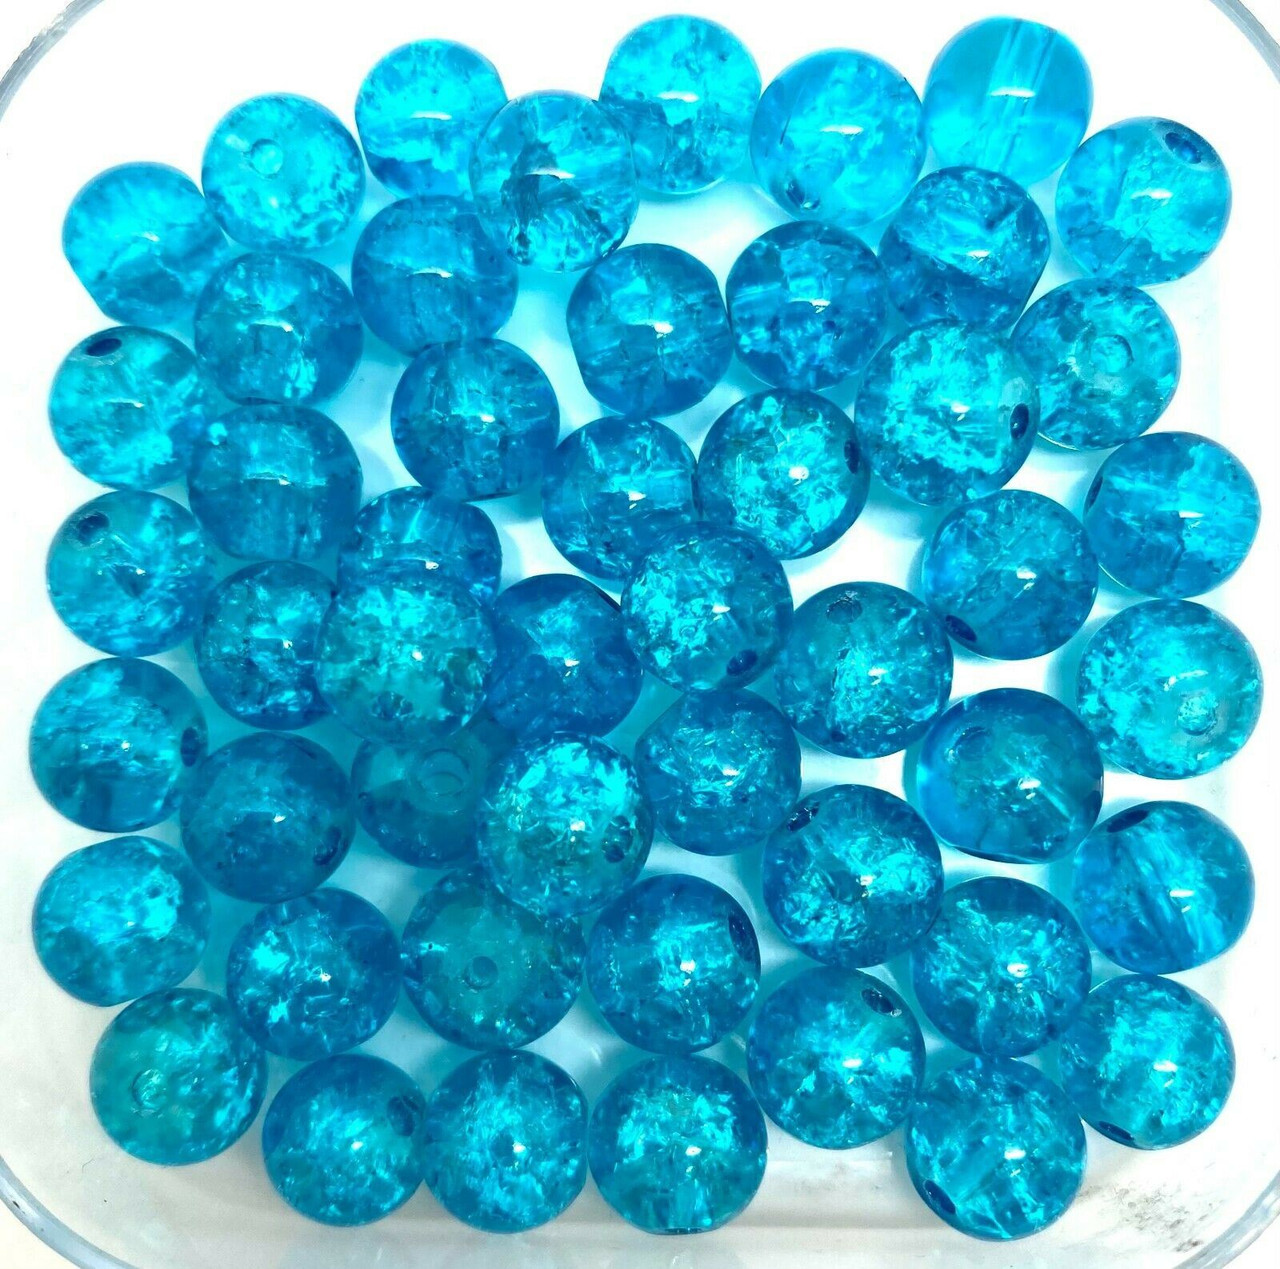 6mm Crackle Glass Beads - Turquoise, 100 beads